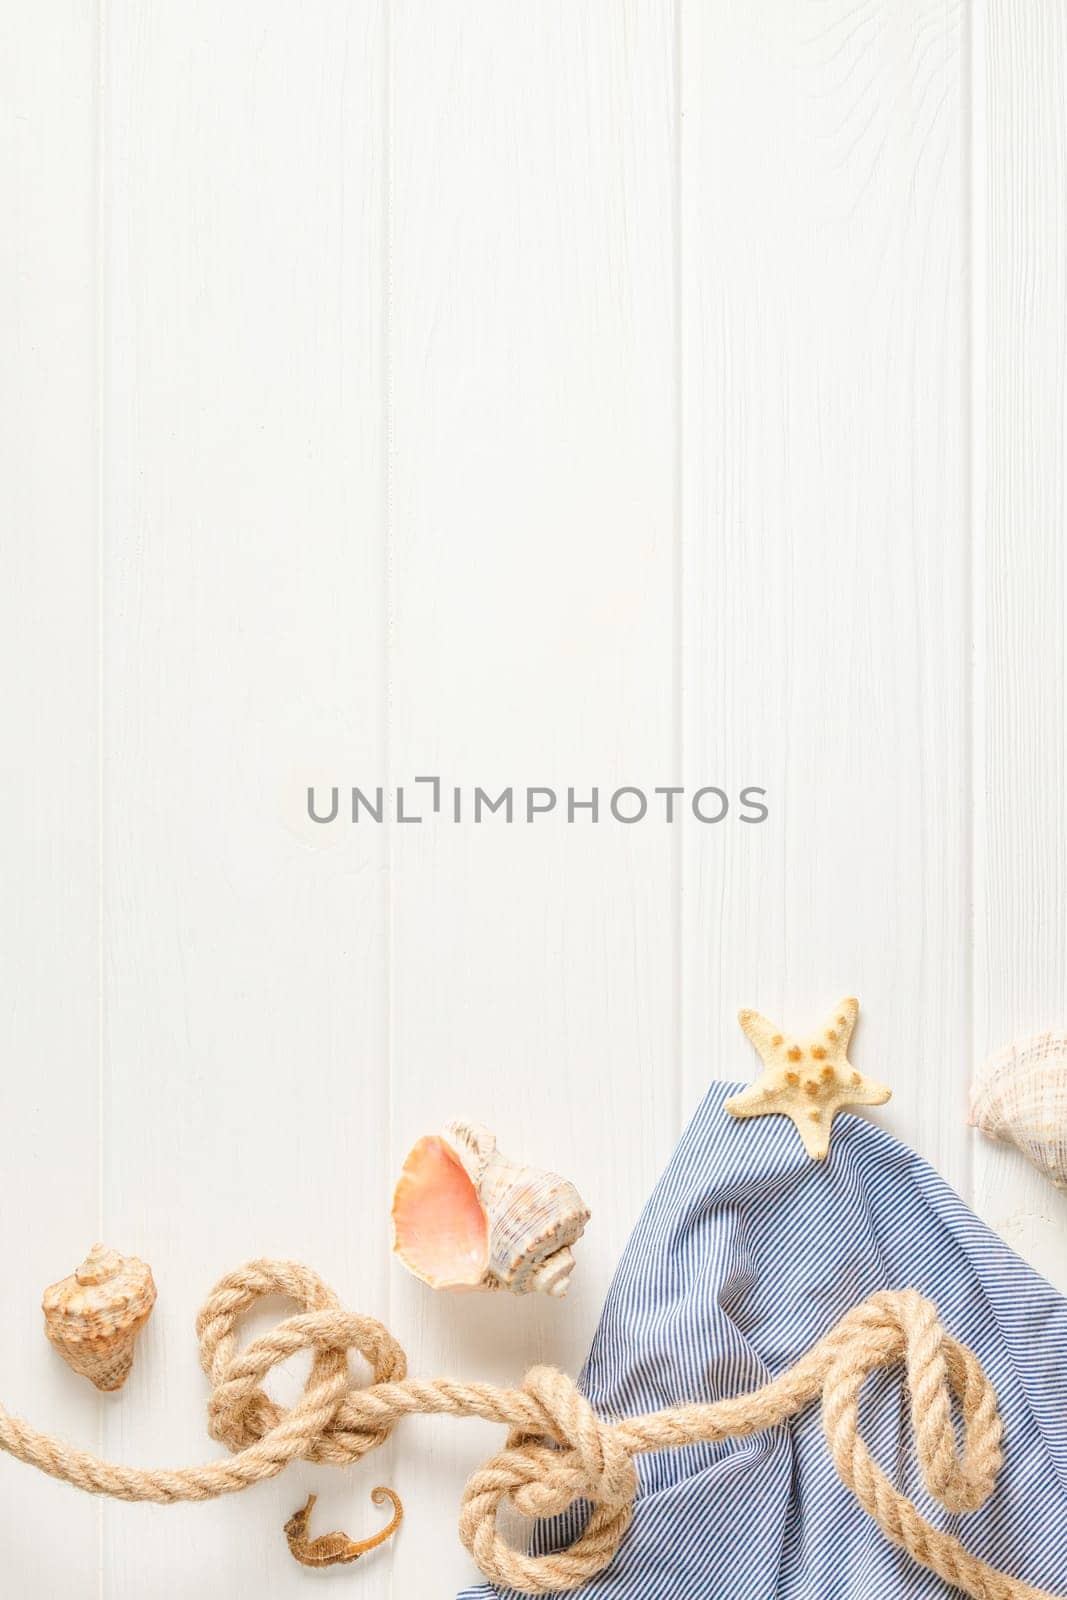 Nautical rope and striped tunic on white wooden background with copy space. Flat lay. Summer vacation concept. Starfish and coral. Top view.